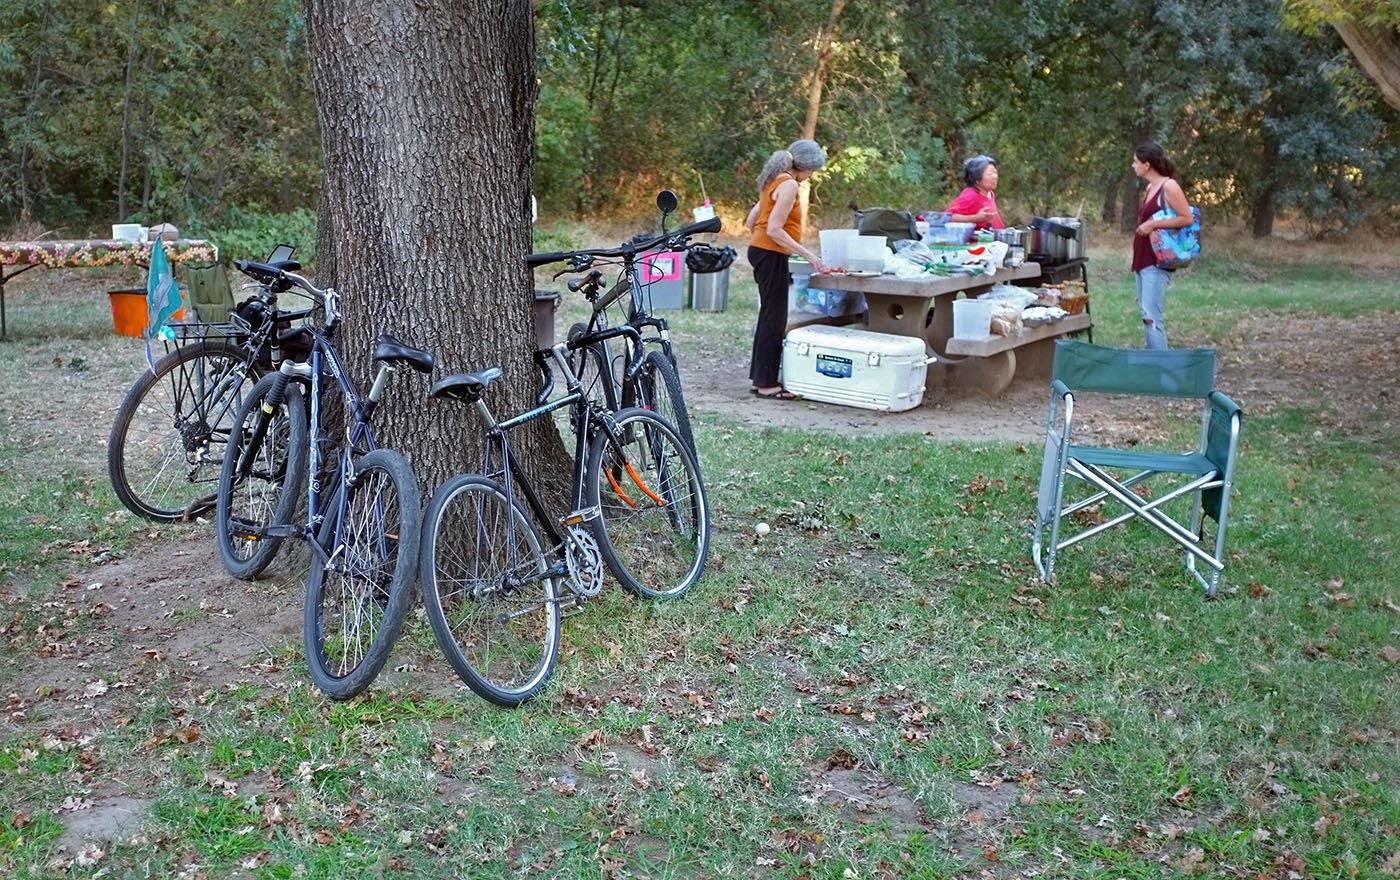  Corning, CA — Bikes rest at the Woodson Bridge campground. The group will spend the night here before the next portion of the Run4Salmon begins. September 25, 2018. Judy Silber/The Spiritual Edge 